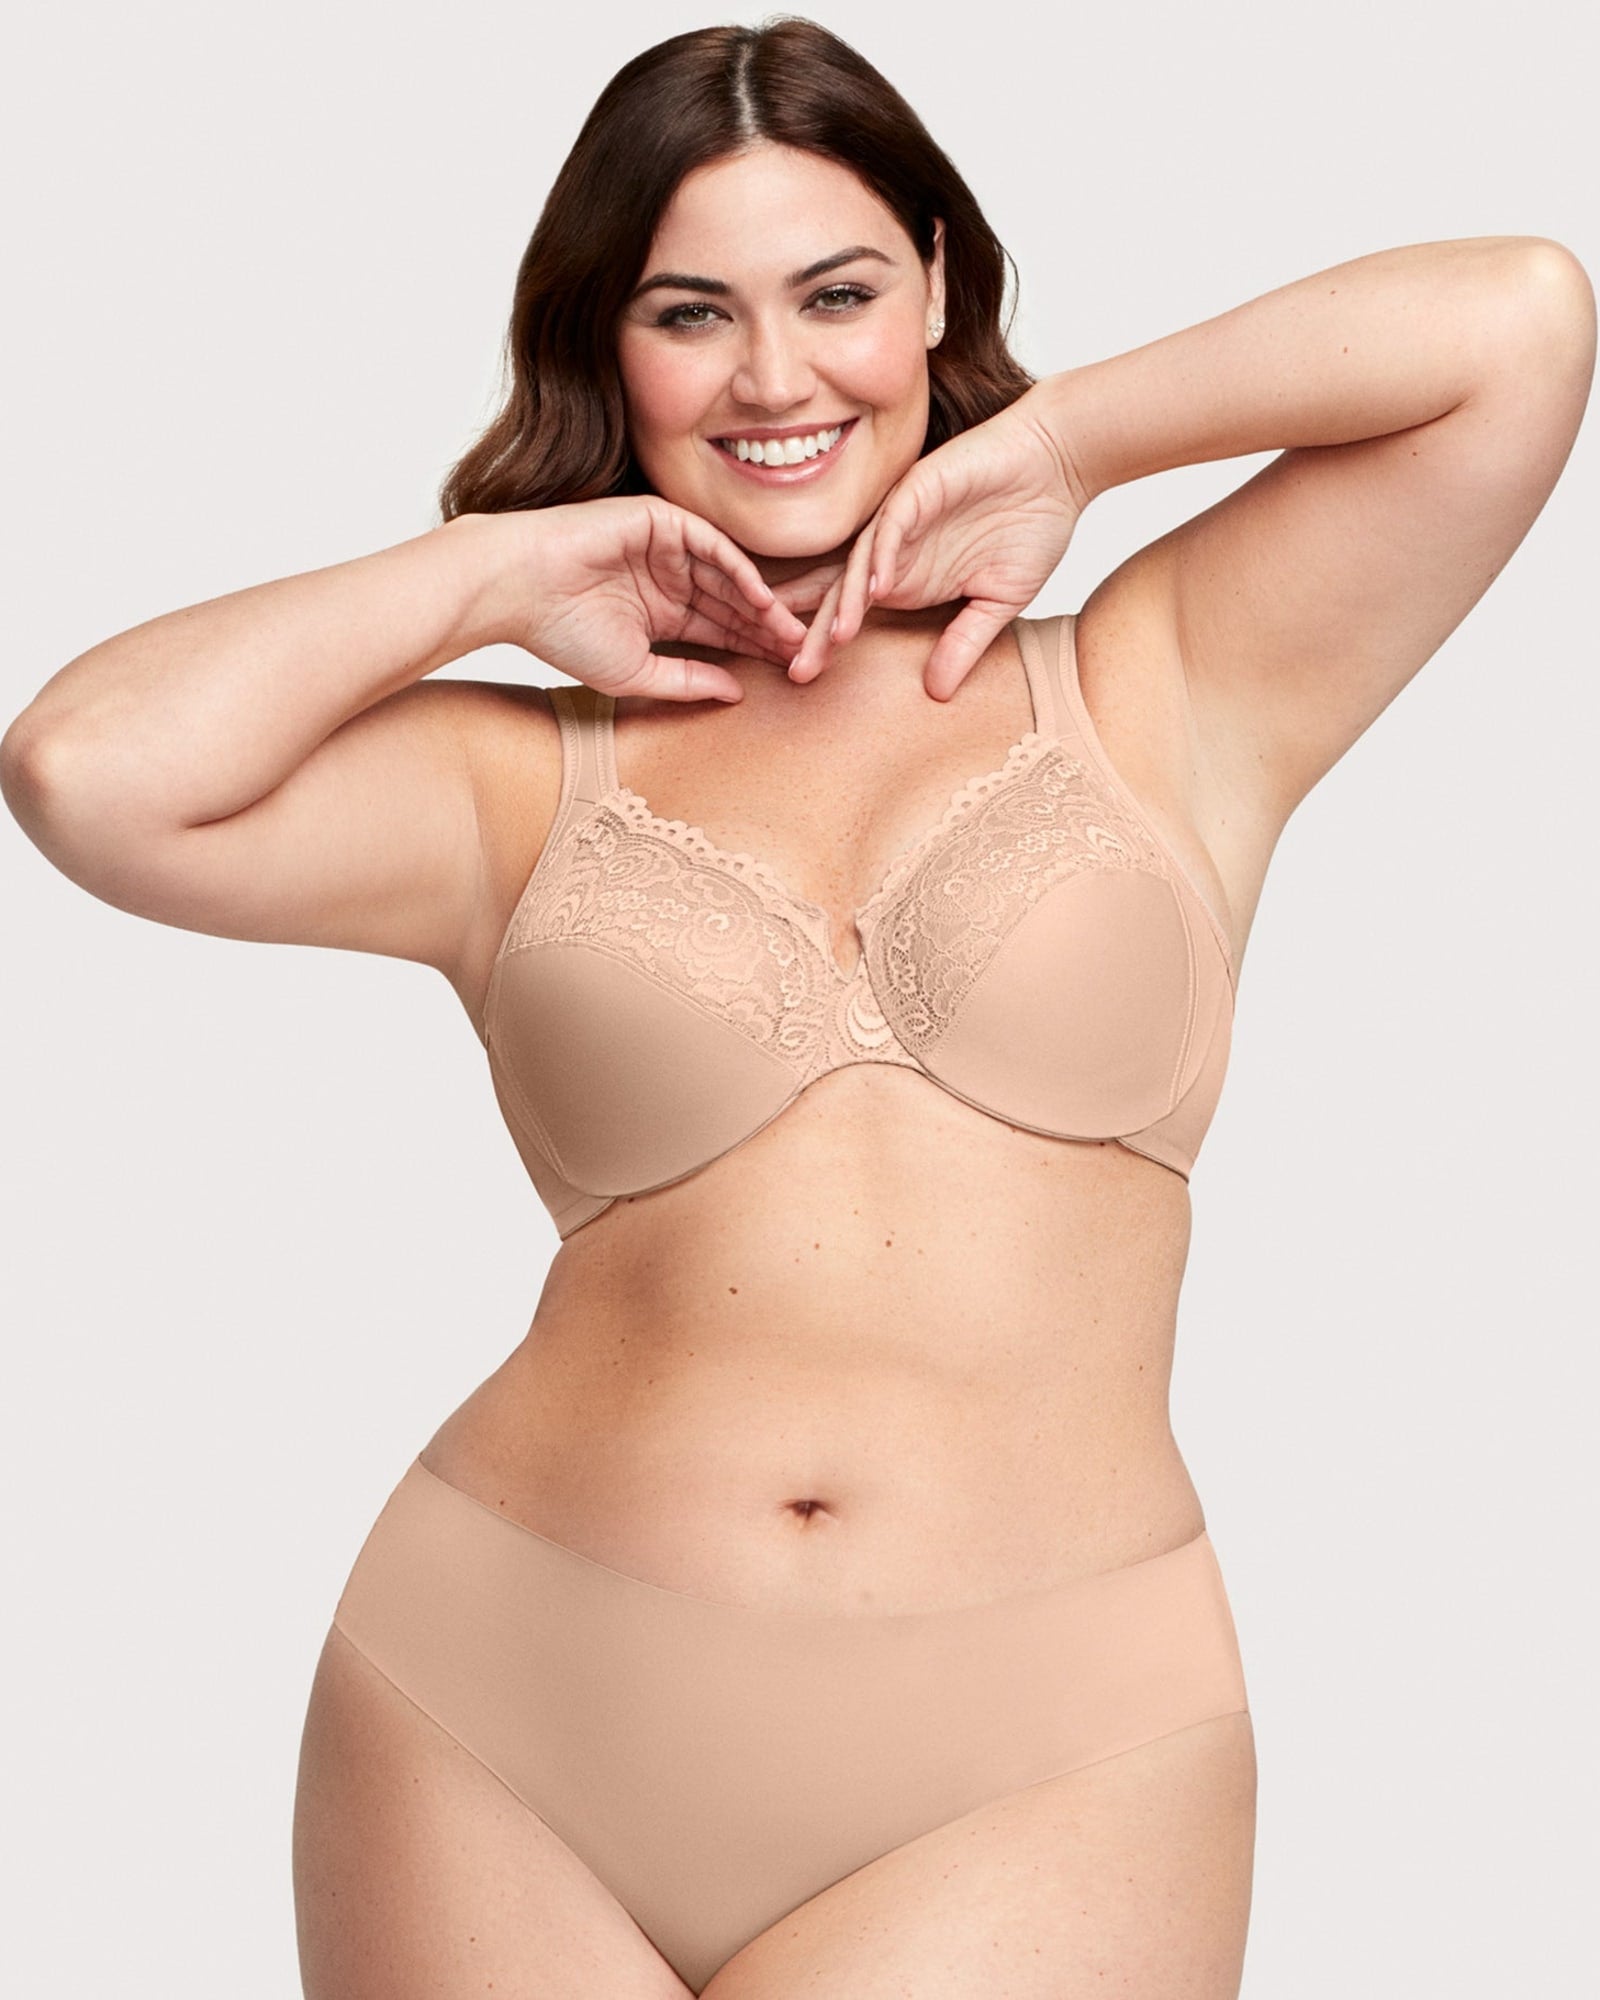 Elila Microfiber & Lace Moulded Softcup Bra in Dusty Rose - Busted